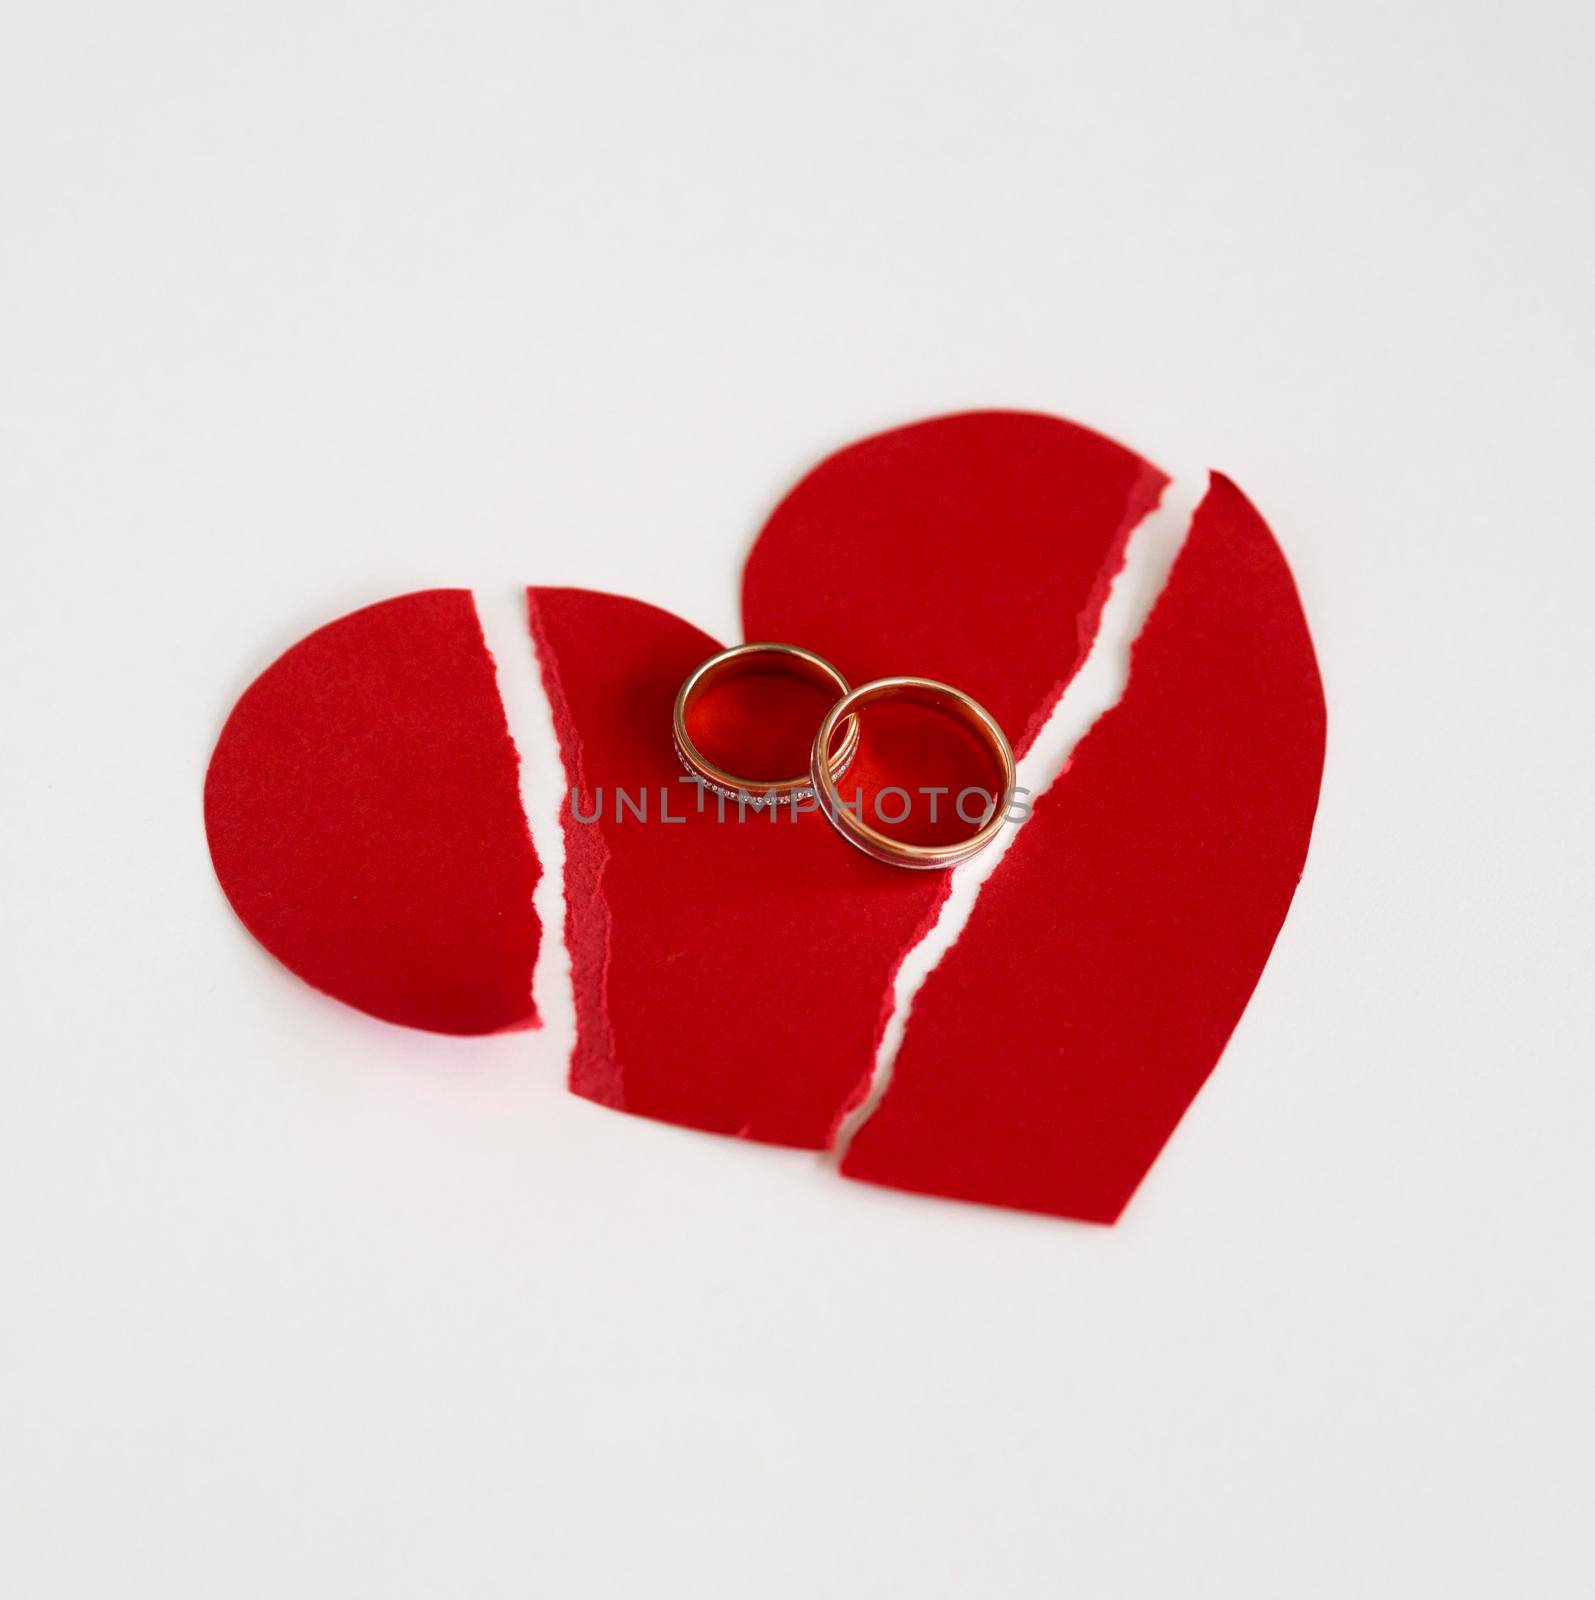 marriage rings paper heart broken. High quality photo by Zahard